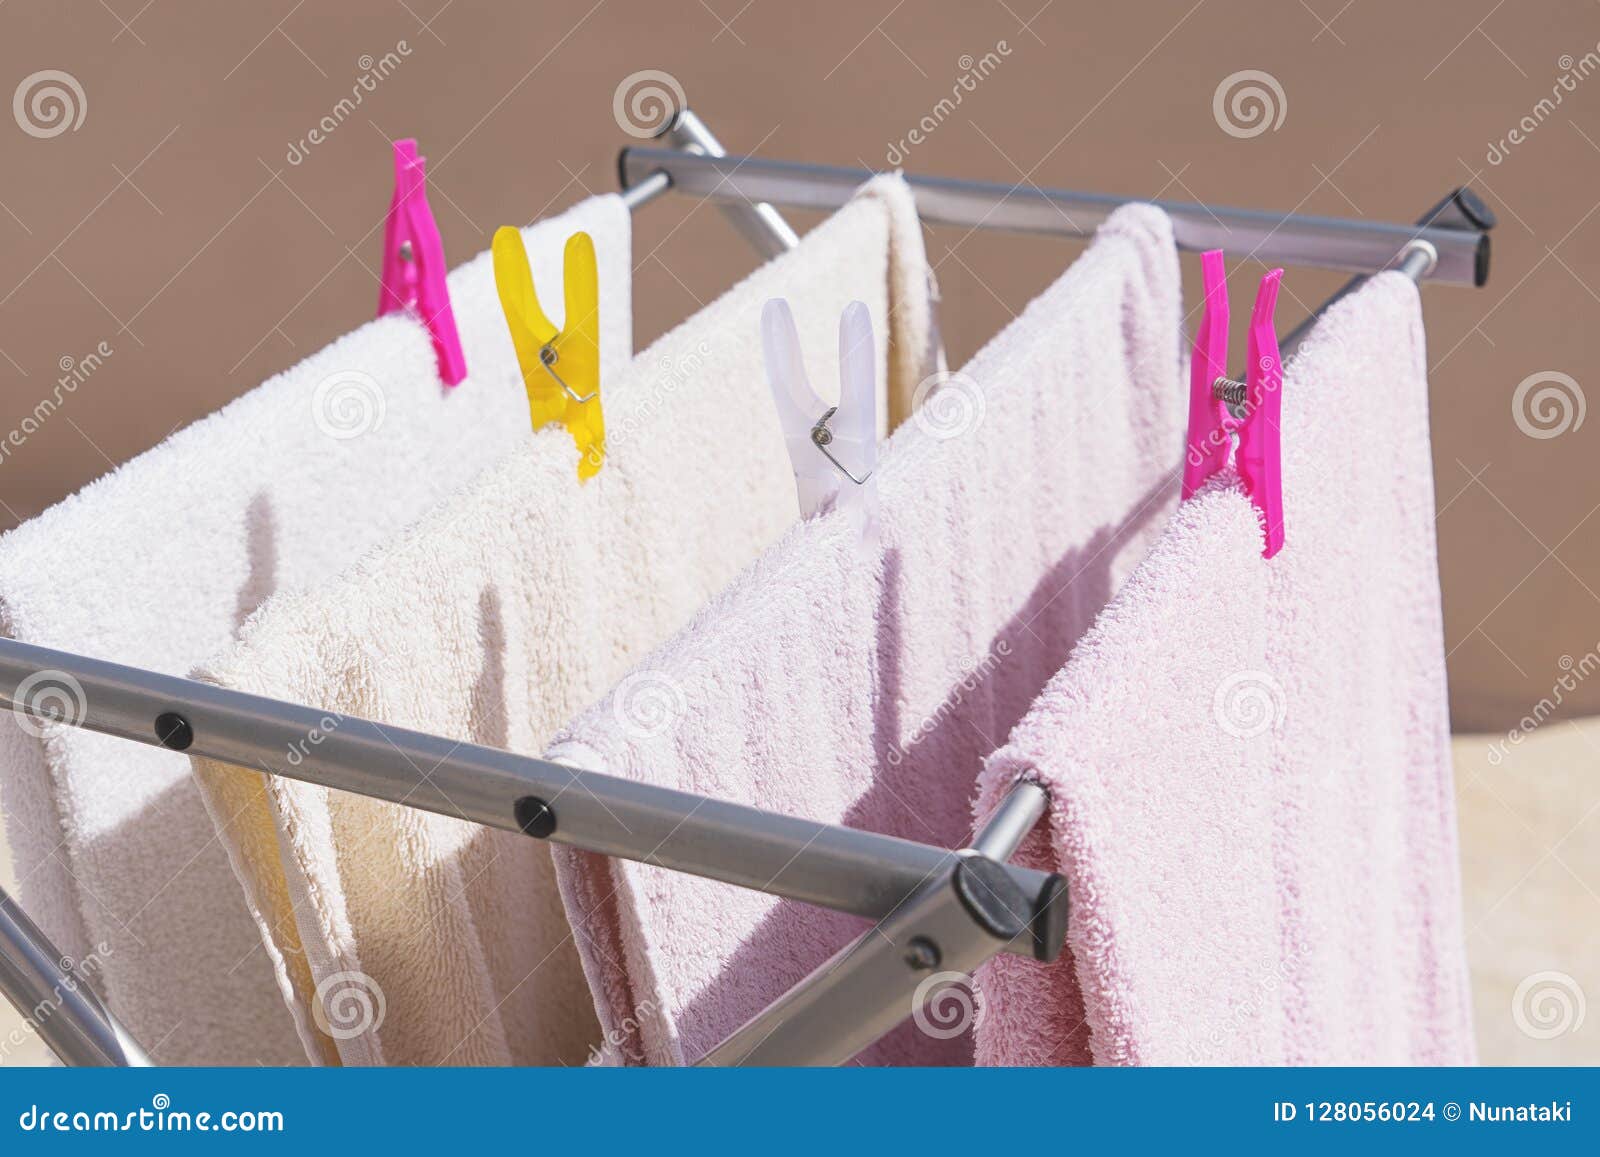 Drying Clean Clothes After Washing Stock Photo - Image of ...